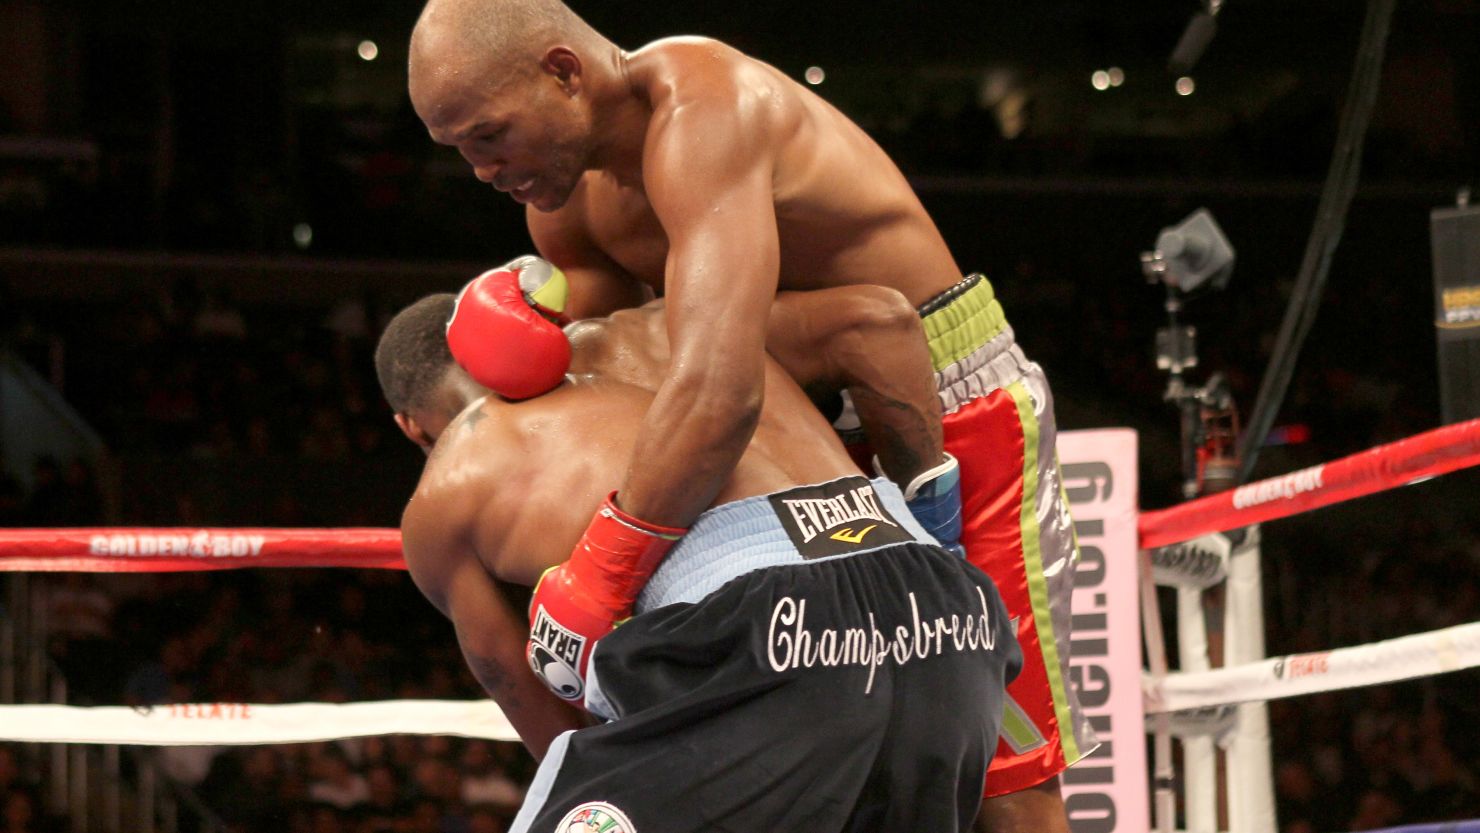 Bernard Hopkins (right) tangles with Chad Dawson during their light heavyweight title fight on October 15.